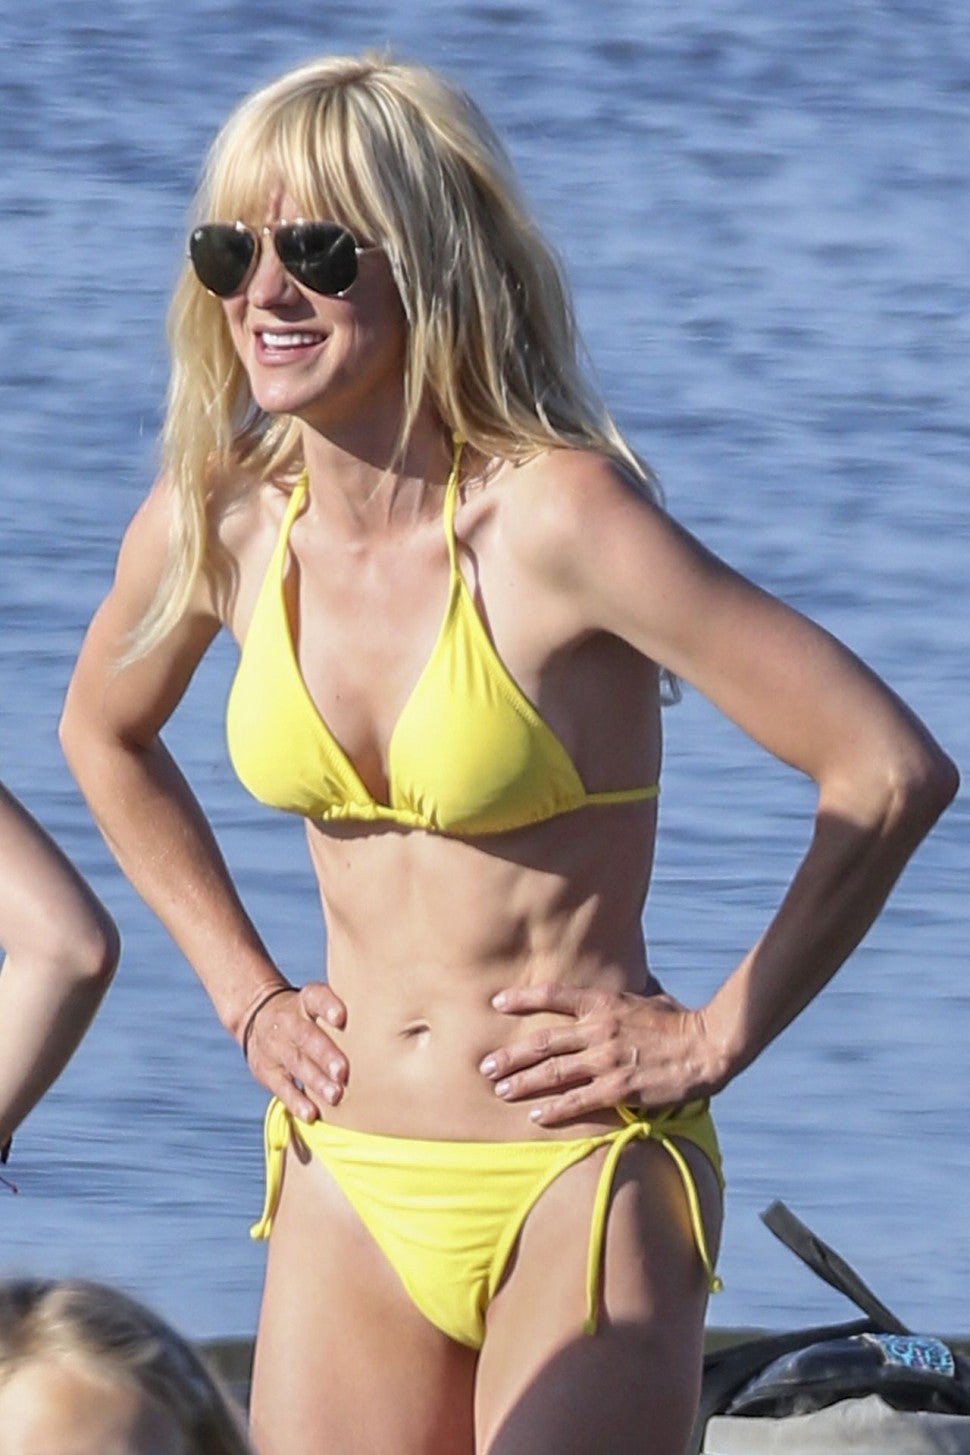 Anna Faris Shows Off Her Fit Figure in Tiny Yellow Bikini on 'Overboard' Set -- See the Pic! | Entertainment Tonight